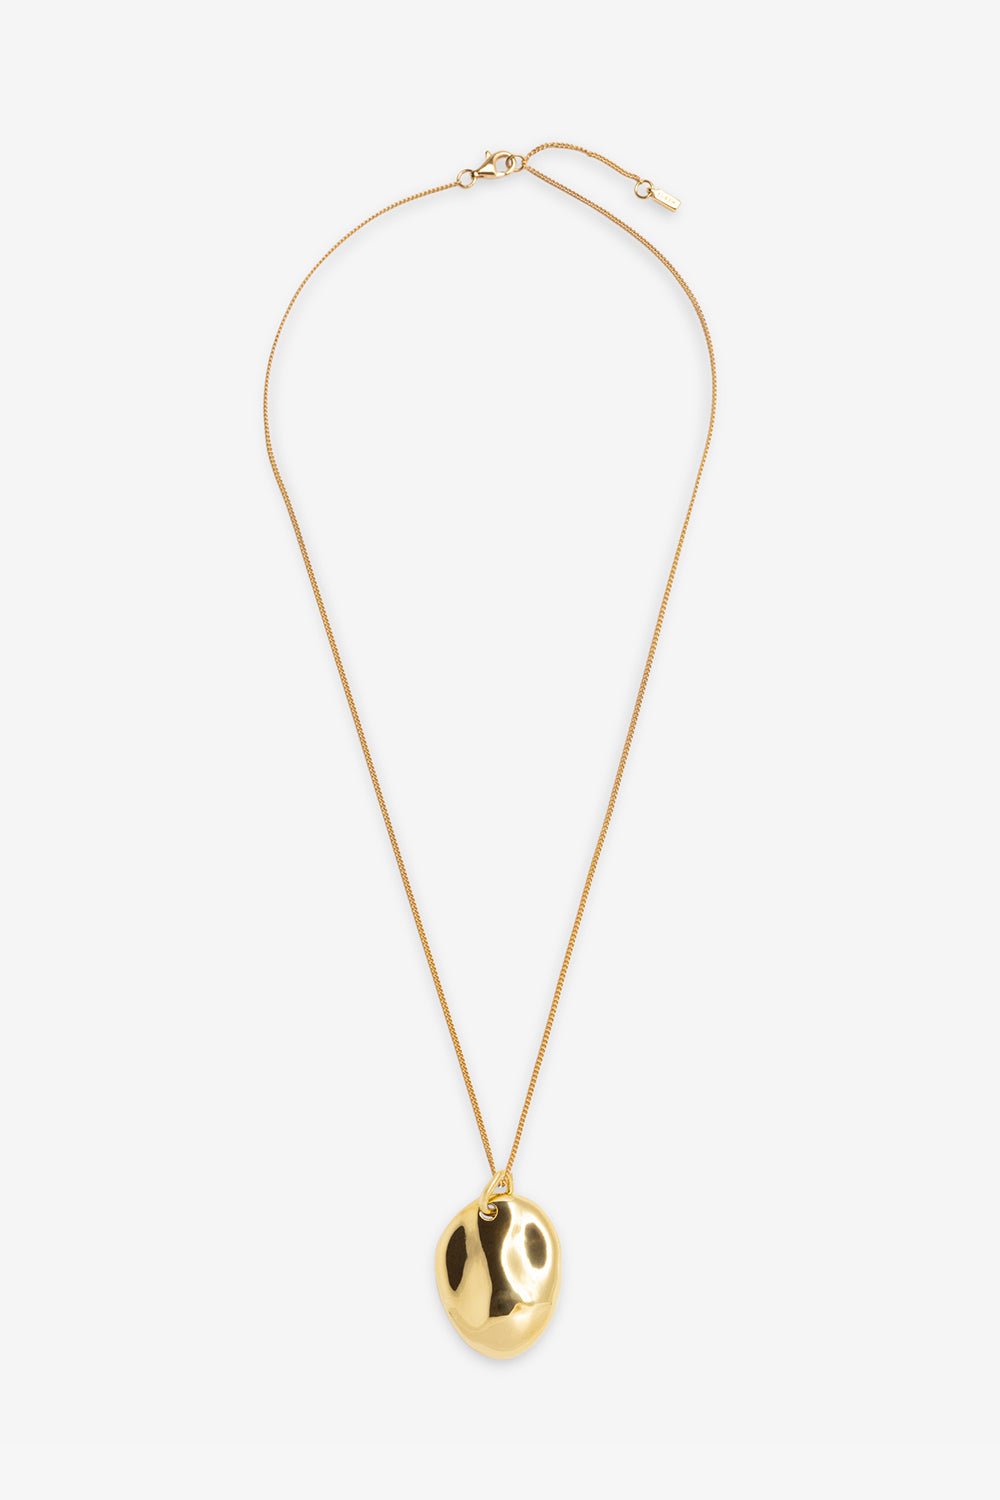 Modern Dylan Dome Necklace, lightweight pendant on 17" fine chain, Recycled Vermeil